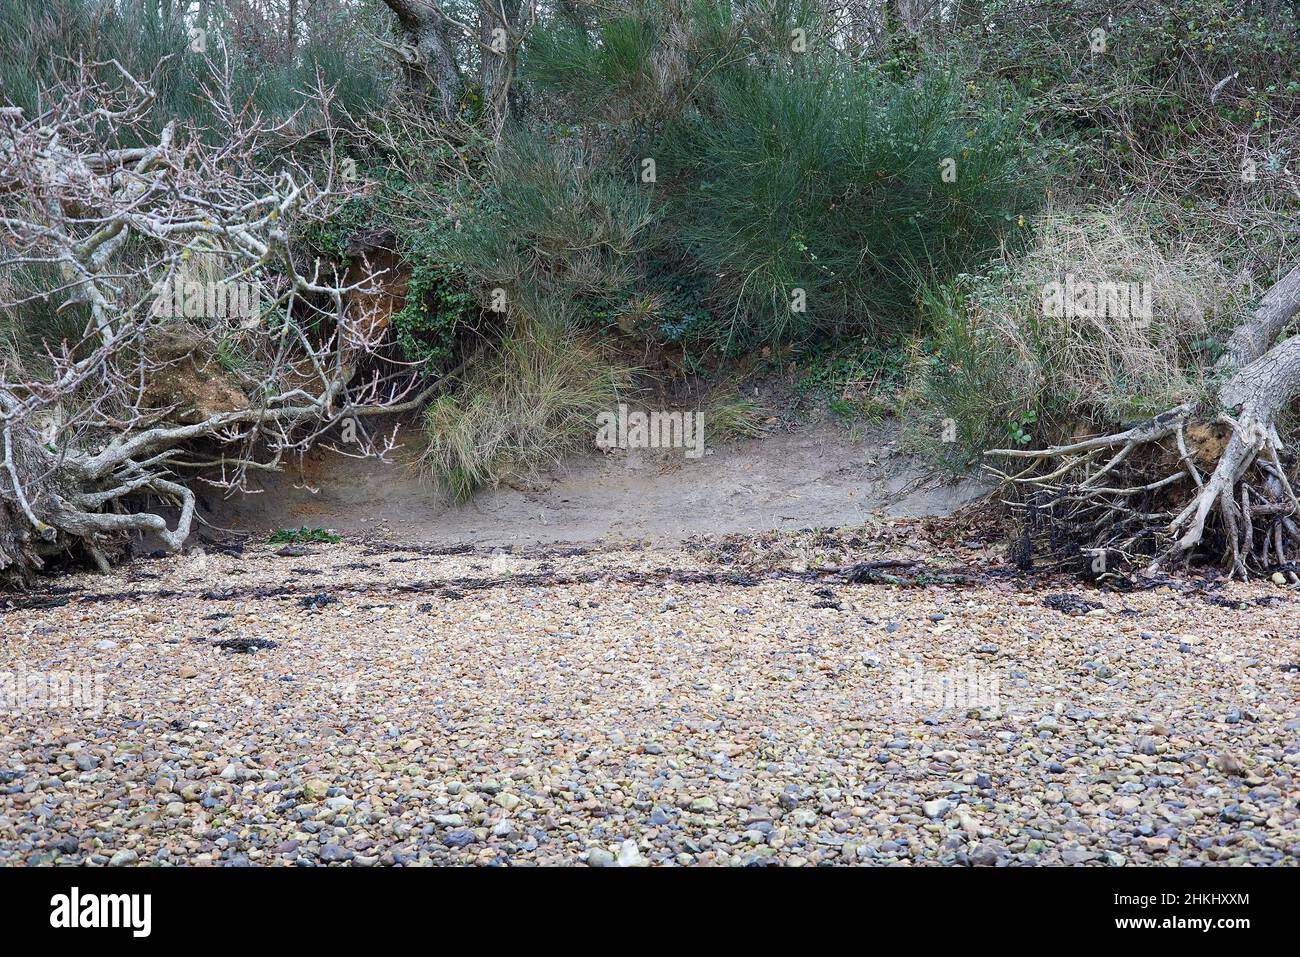 Soil has been washed away between trees due to low level coastal erosion. Stock Photo